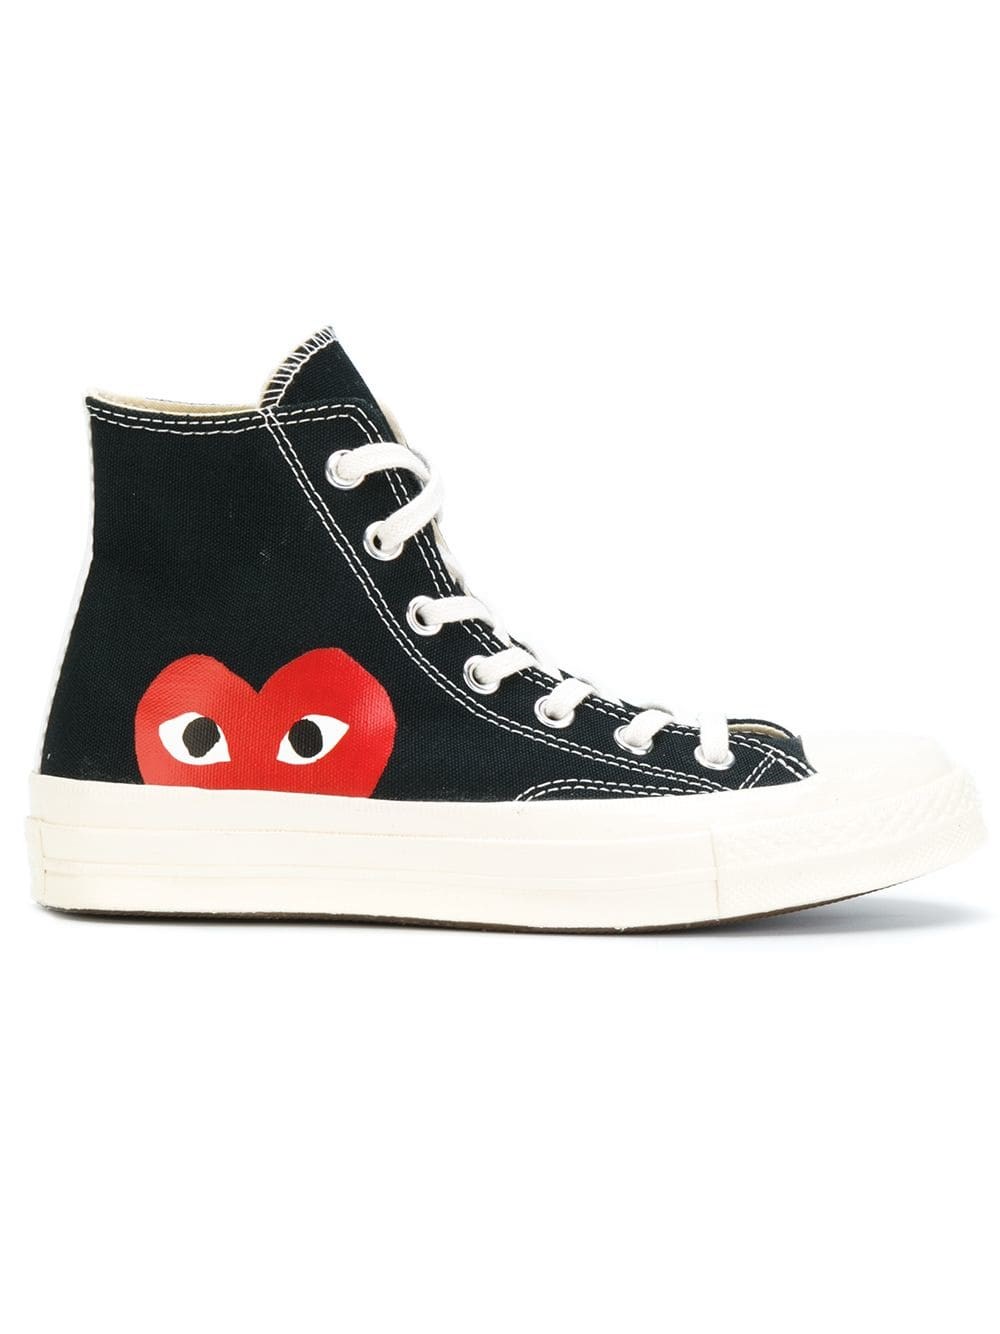 converse sneakers with heart